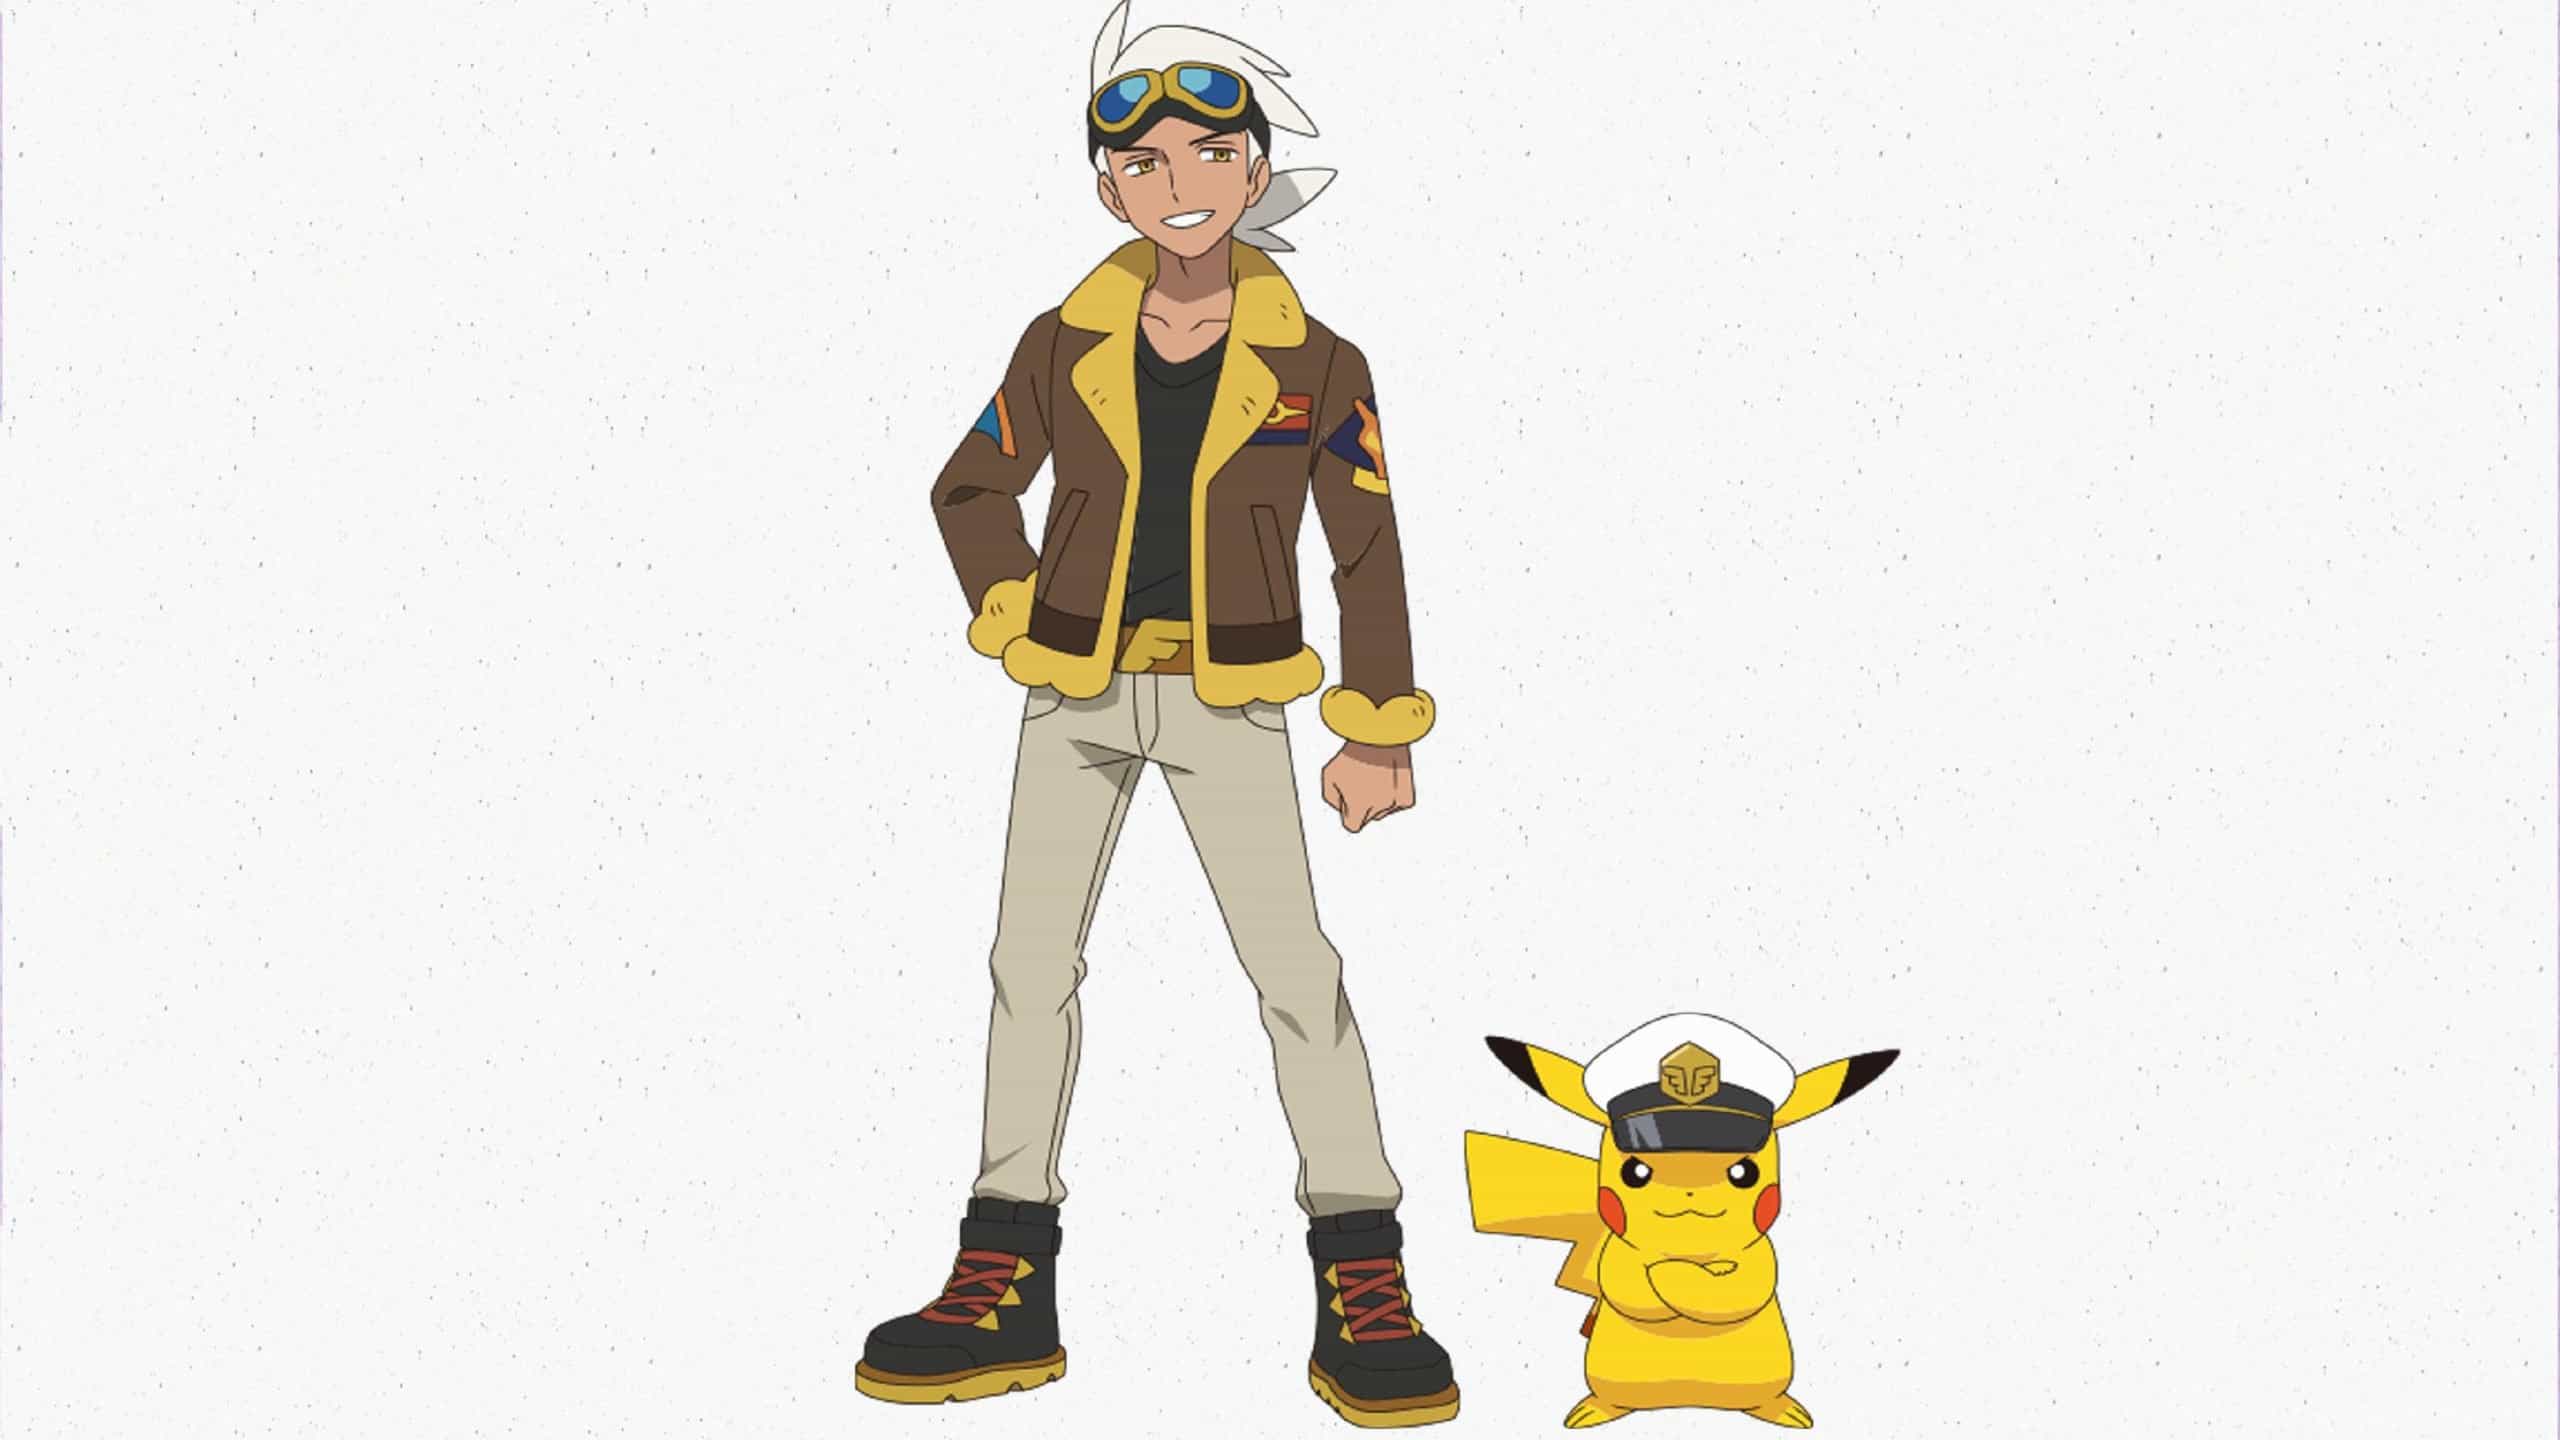 Leader Of The Rising Vortechers Frieda And His Partner Captain Pikachu - Pokémon Horizons The Series